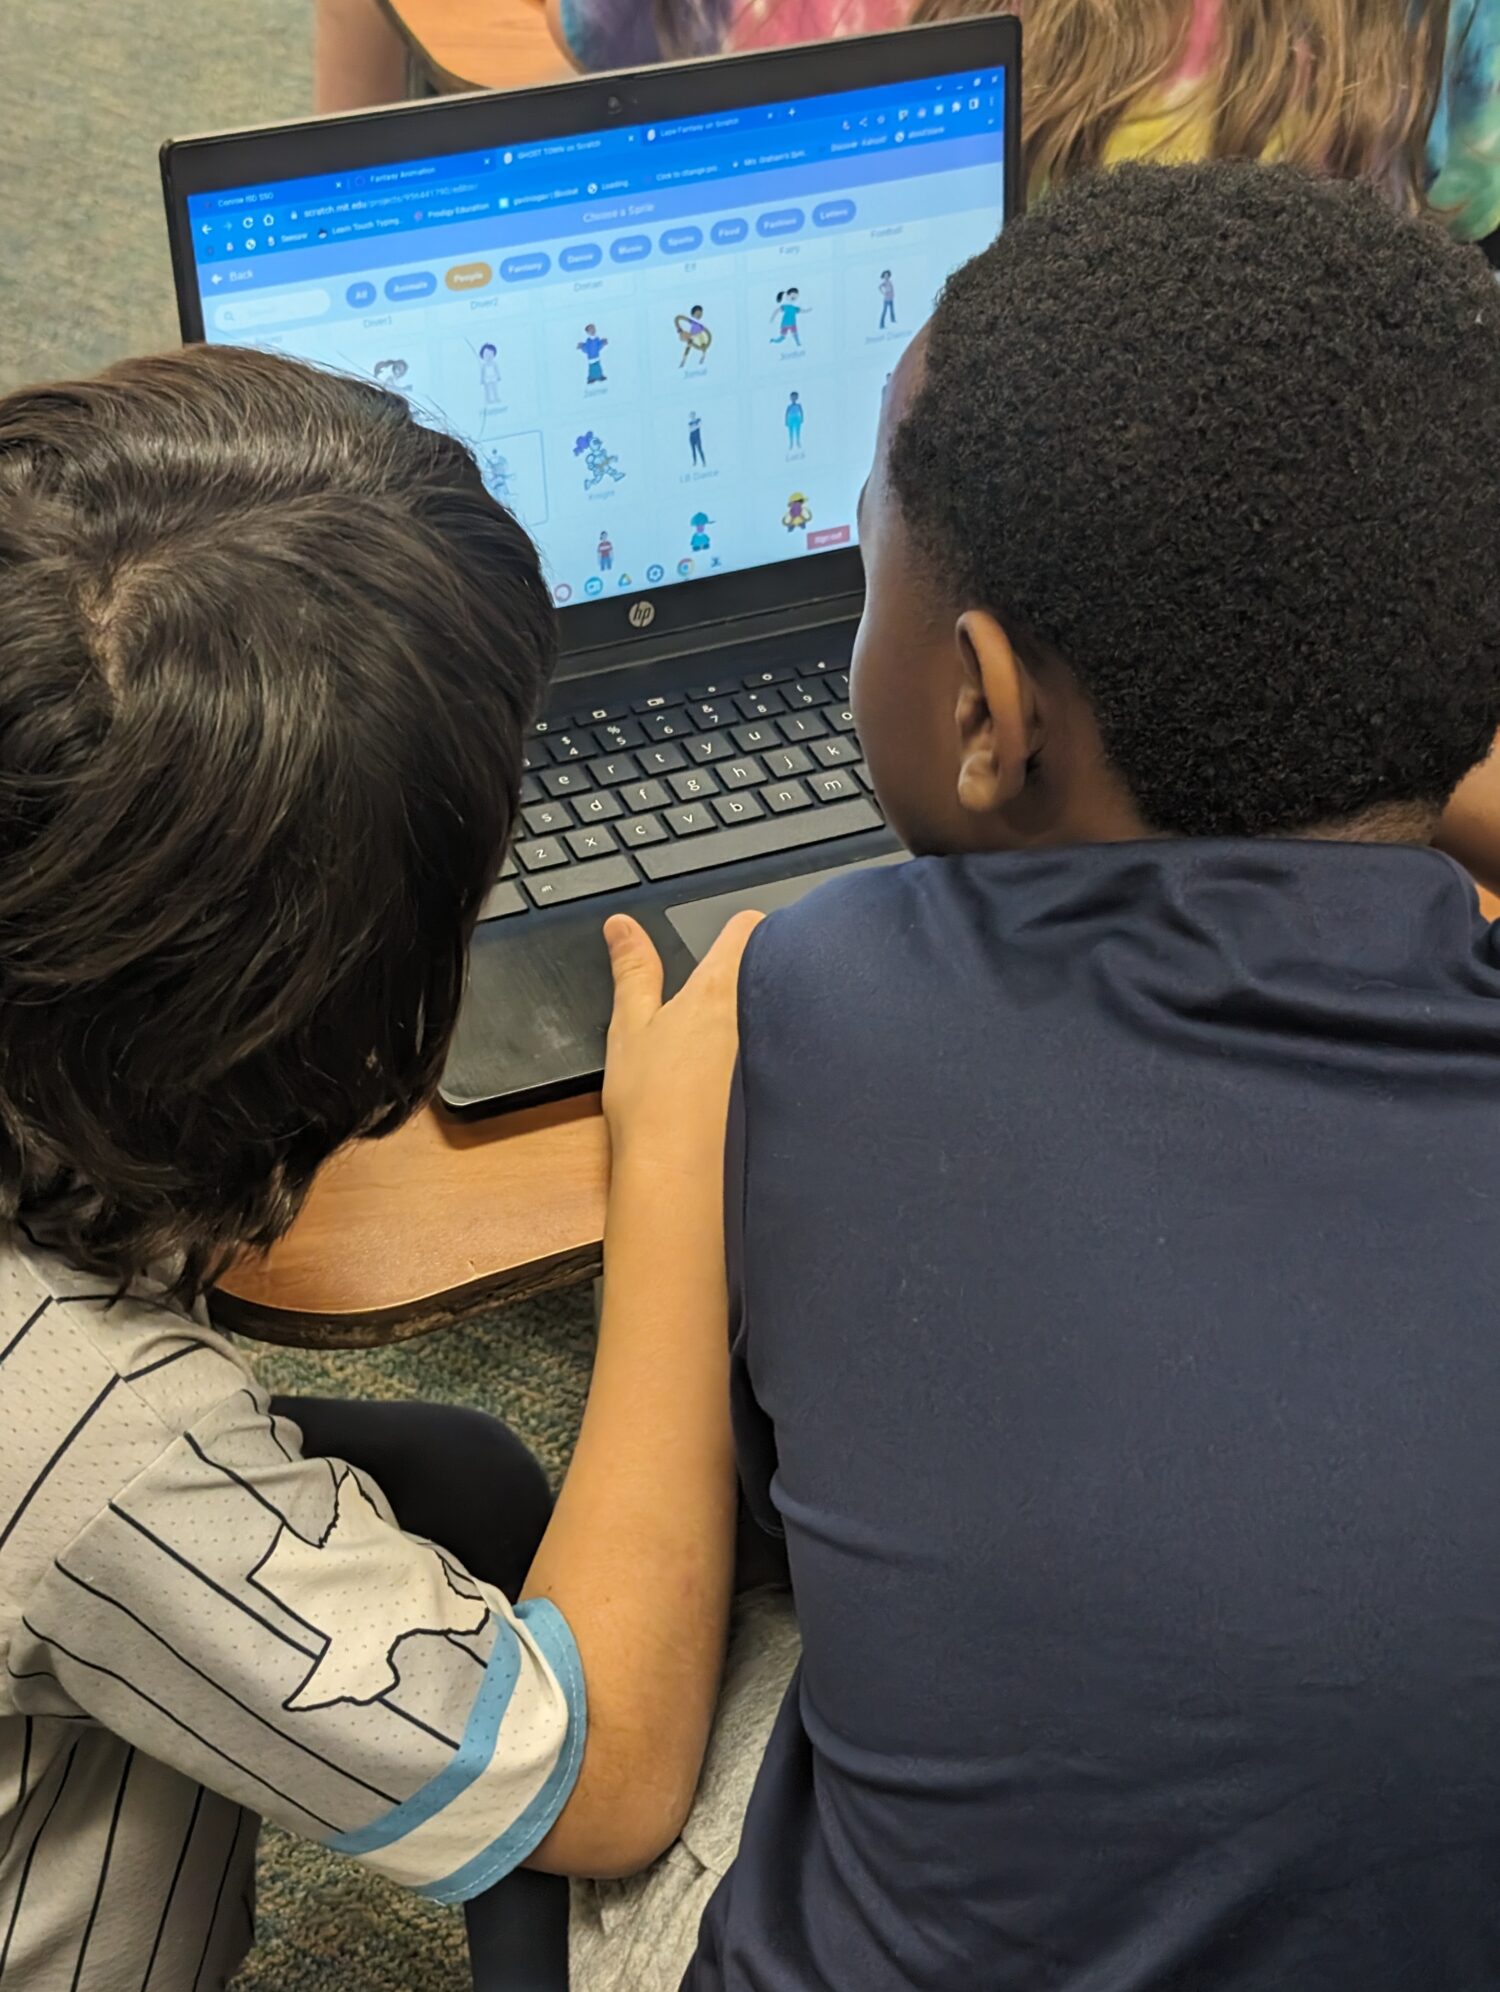 Picture over the shoulder of two boys looking at a computer screen.